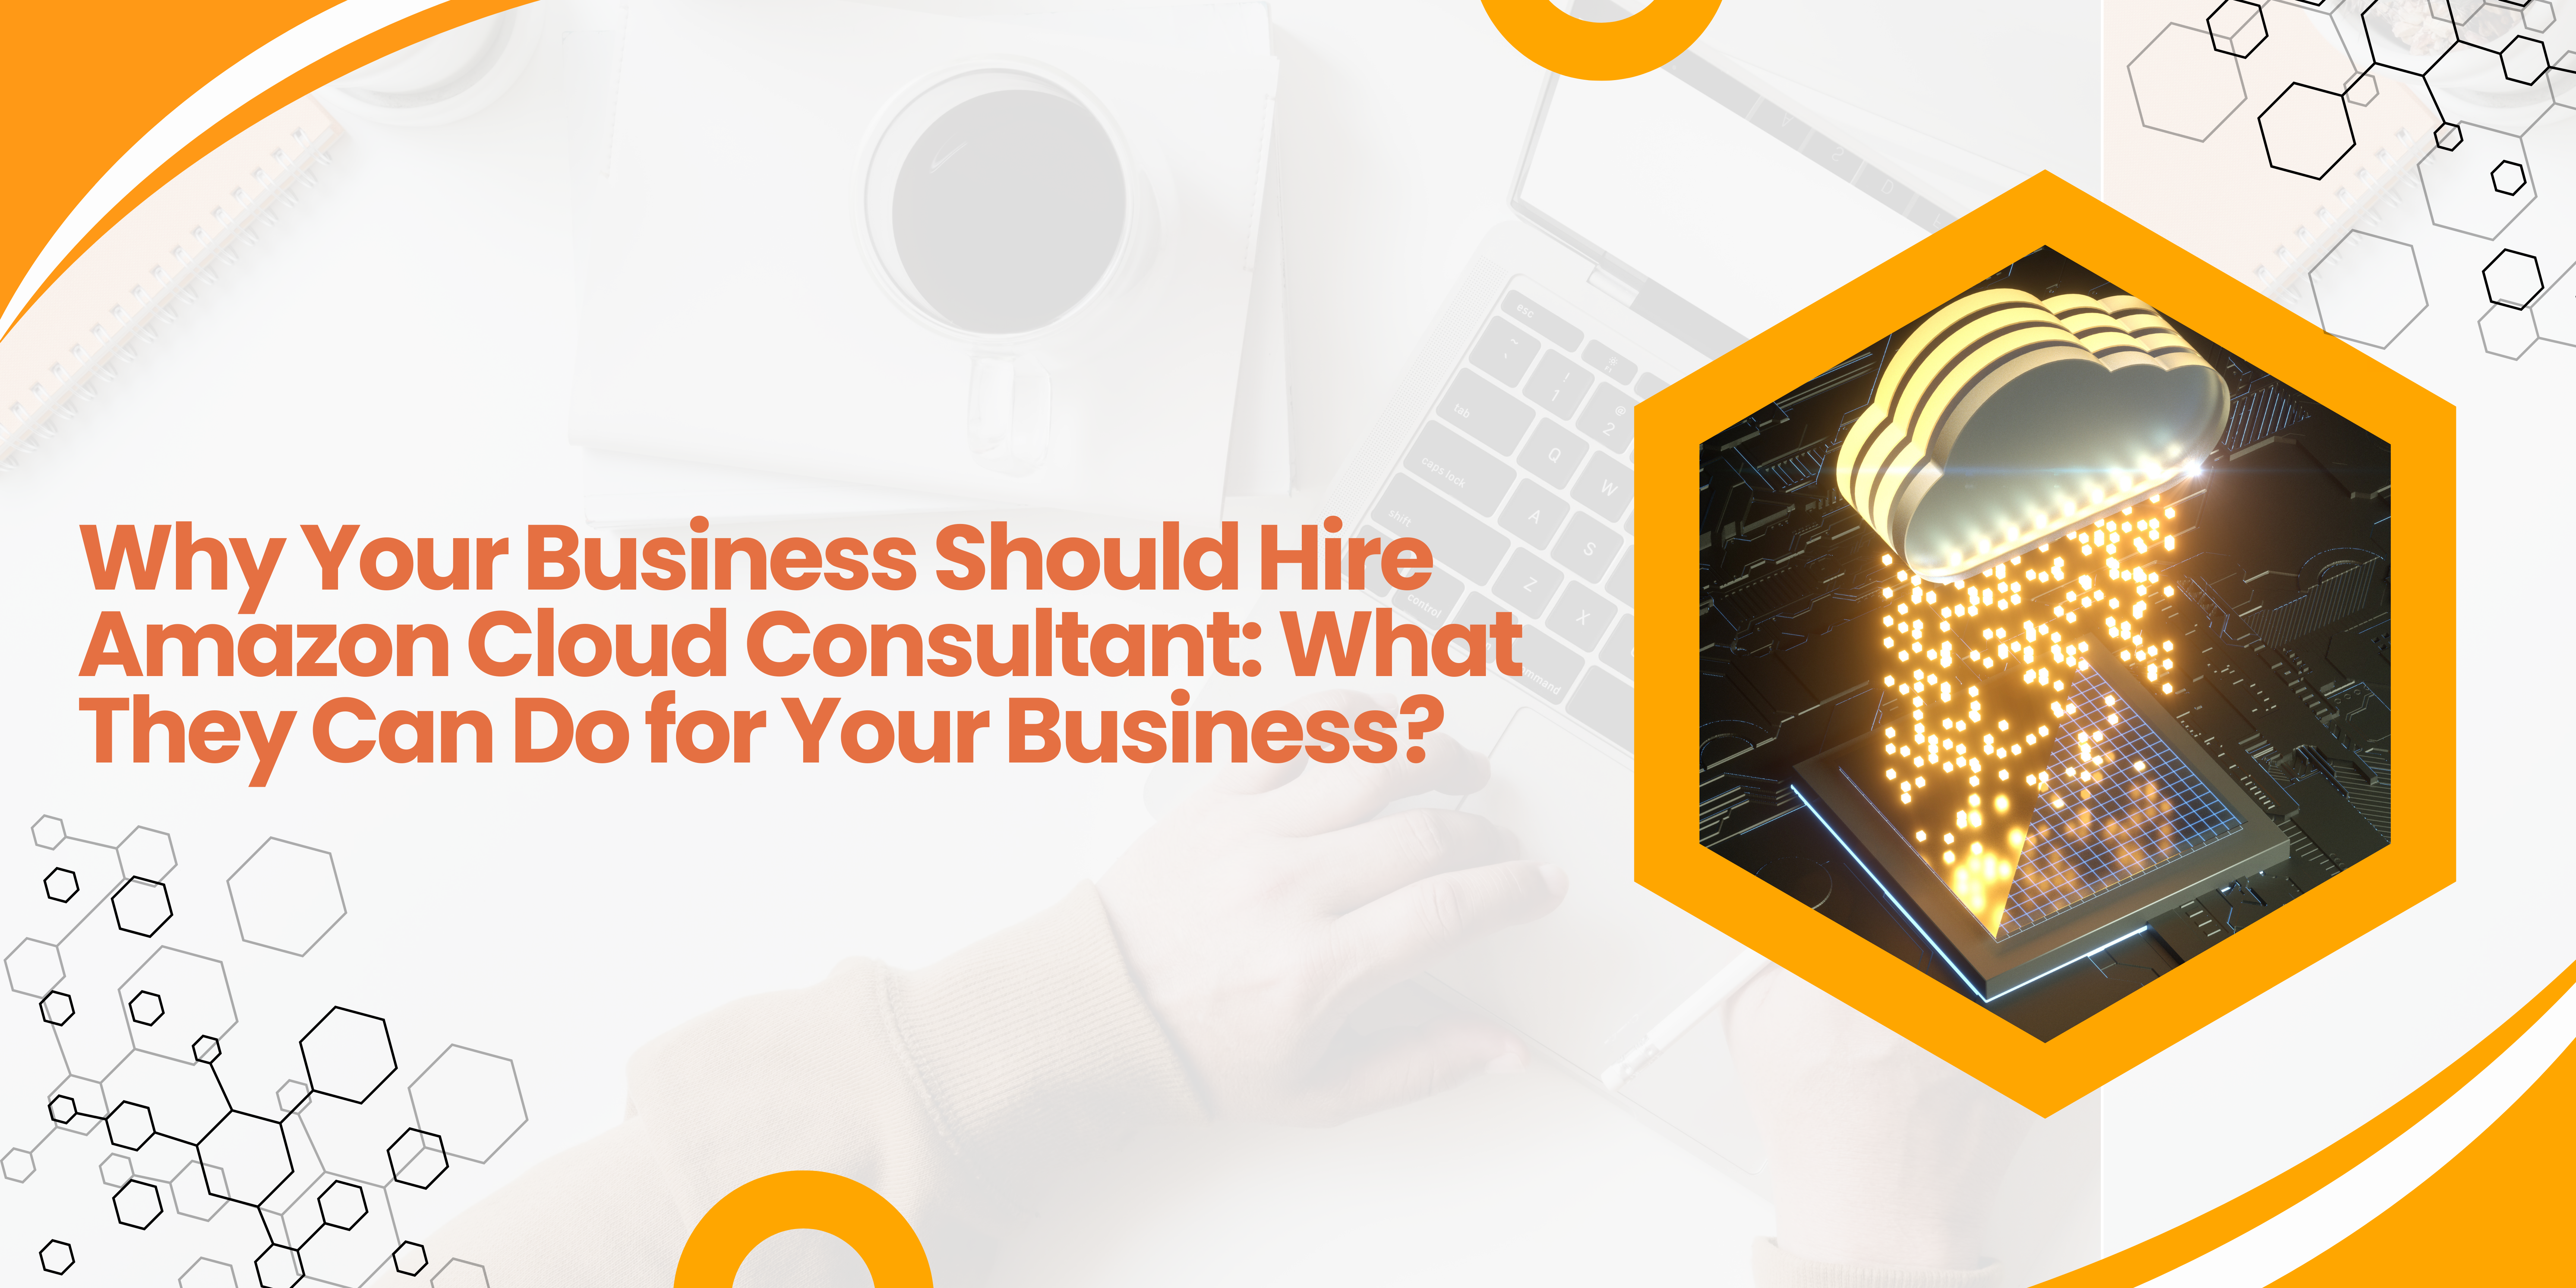 Why Your Business Should Hire Amazon Cloud Consultant: What They Can Do for Your Business?